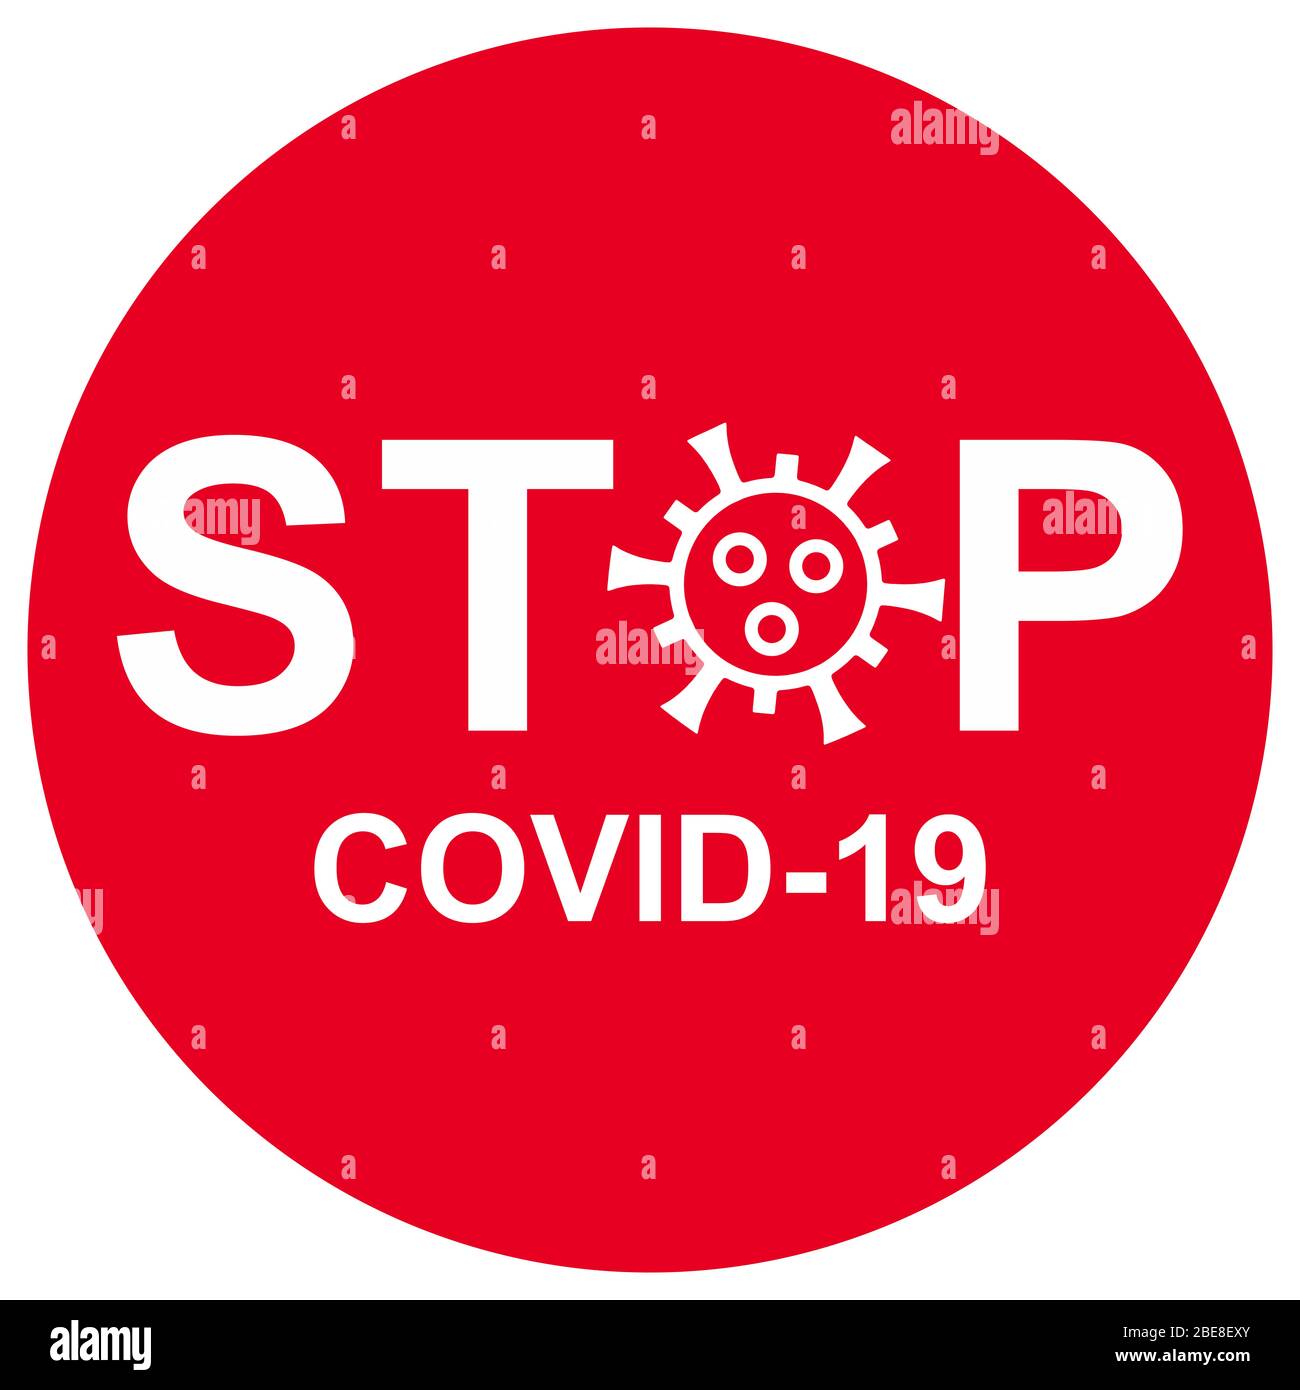 Sign Stop COVID-19, concept of coronavirus disease prevention and quarantine. Banner with COVID19 coronavirus icon and pandemic warning theme on red. Stock Photo